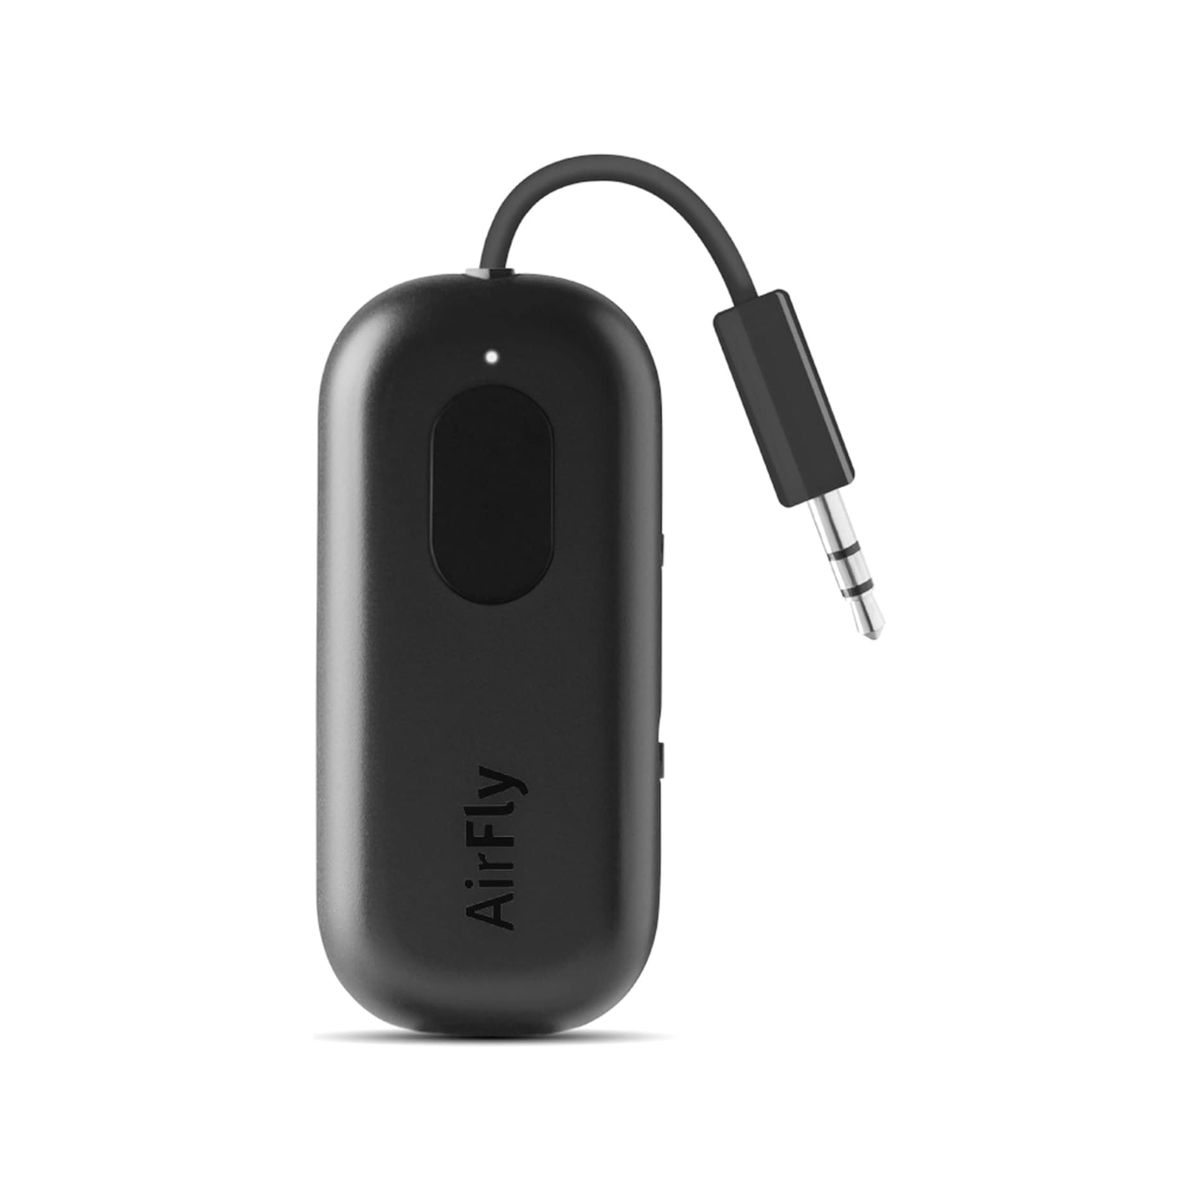 The AirFly Pro audio sharing device is a must-have for travel, and it’s 20% off